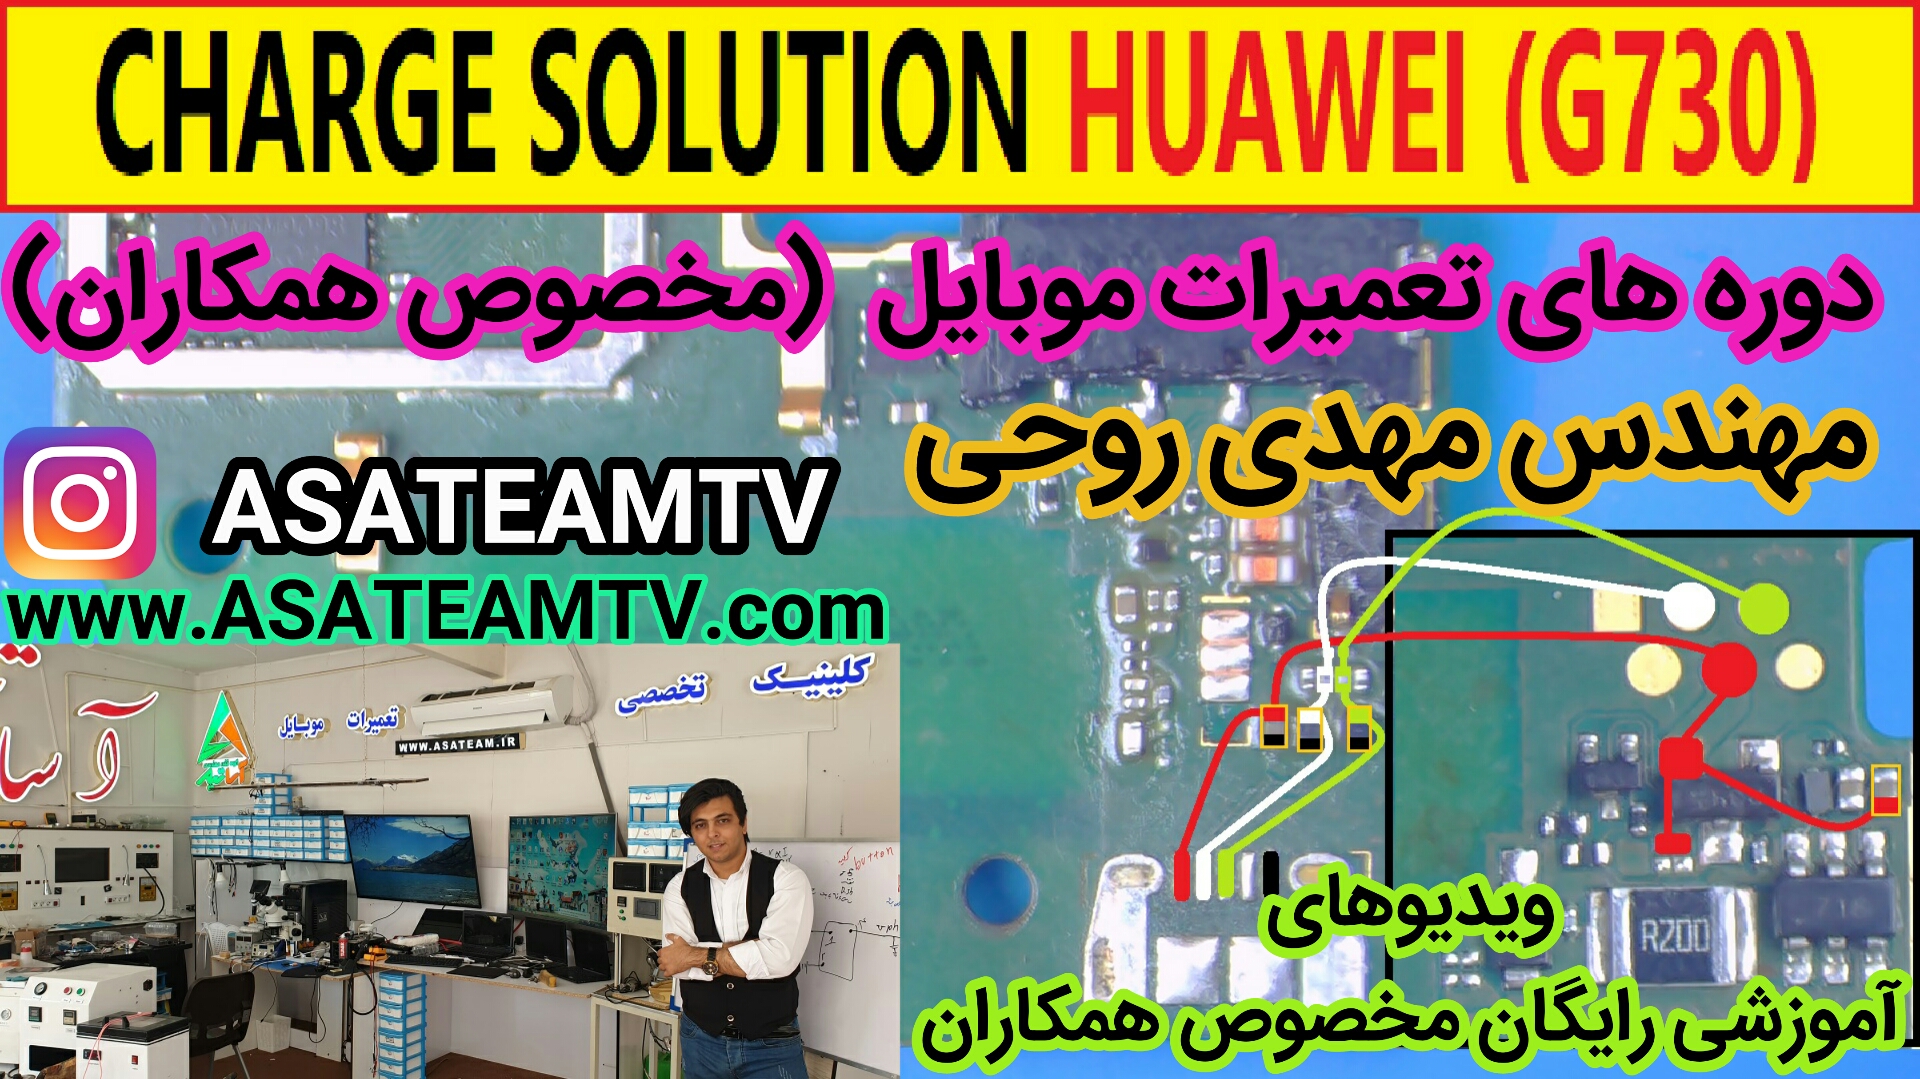 HUAWEI-G730-CHARGE-SOLUTION